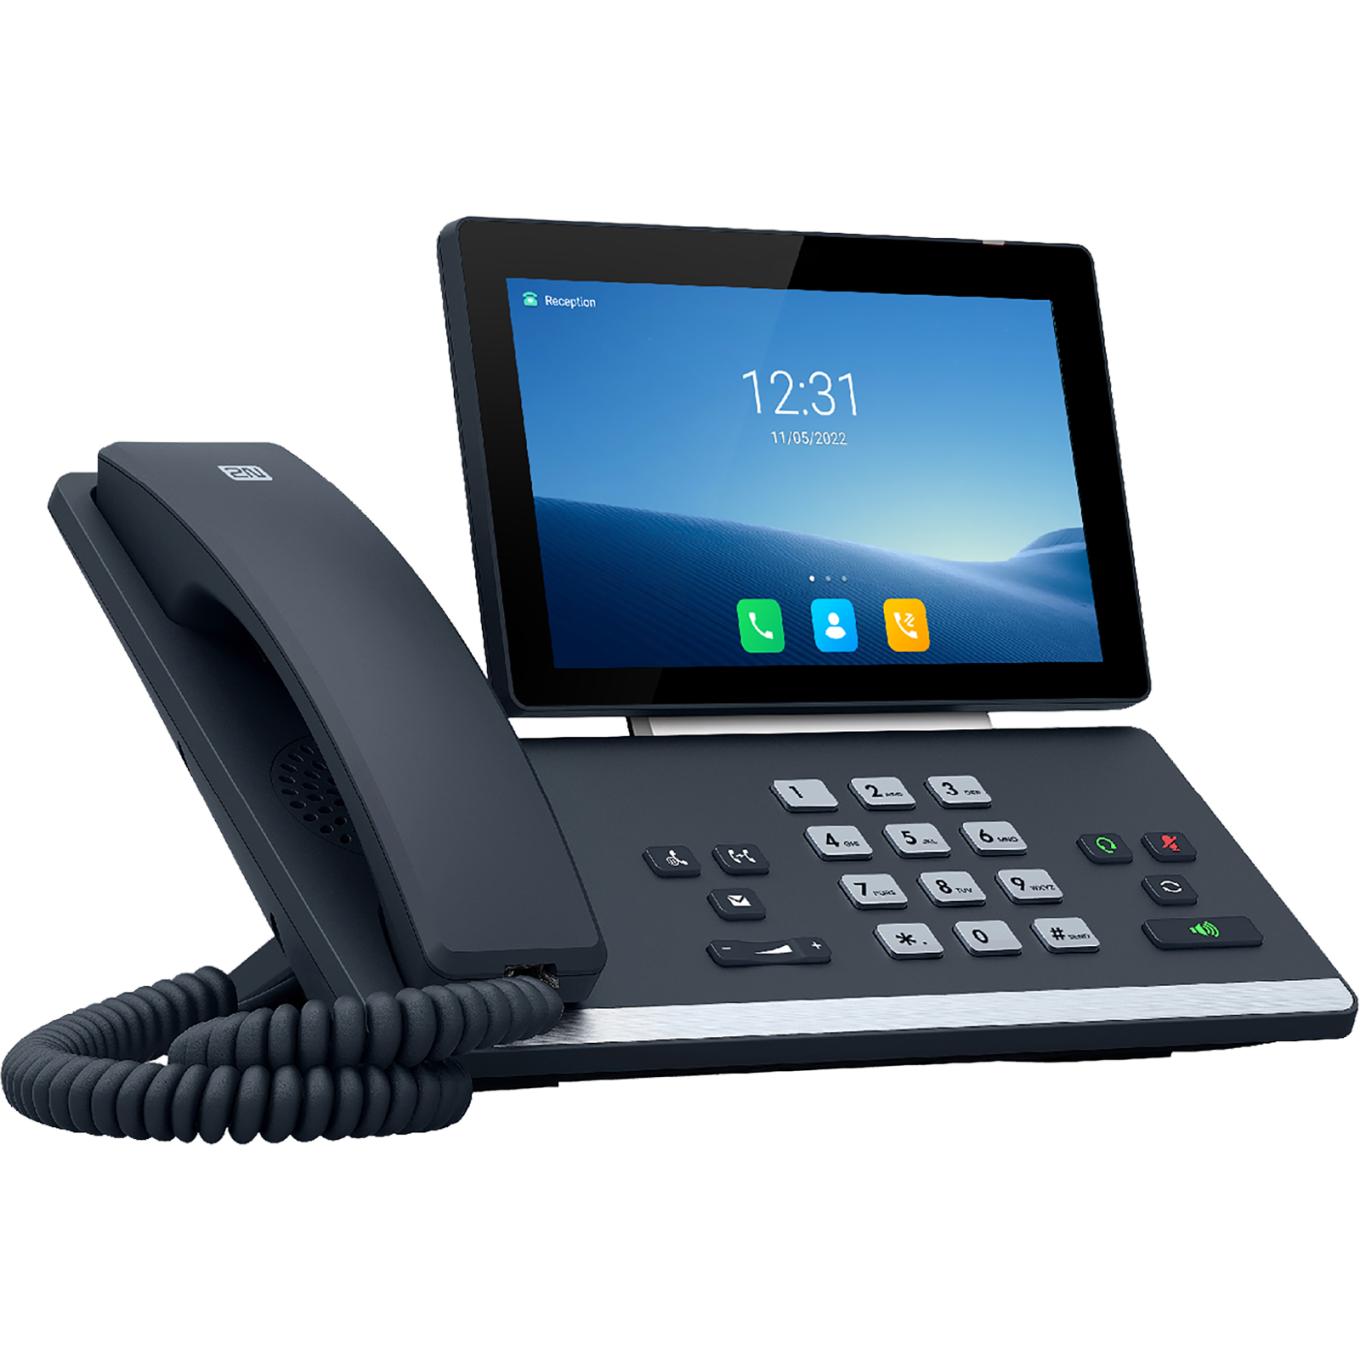 IP Telephone, viewed from its right angle